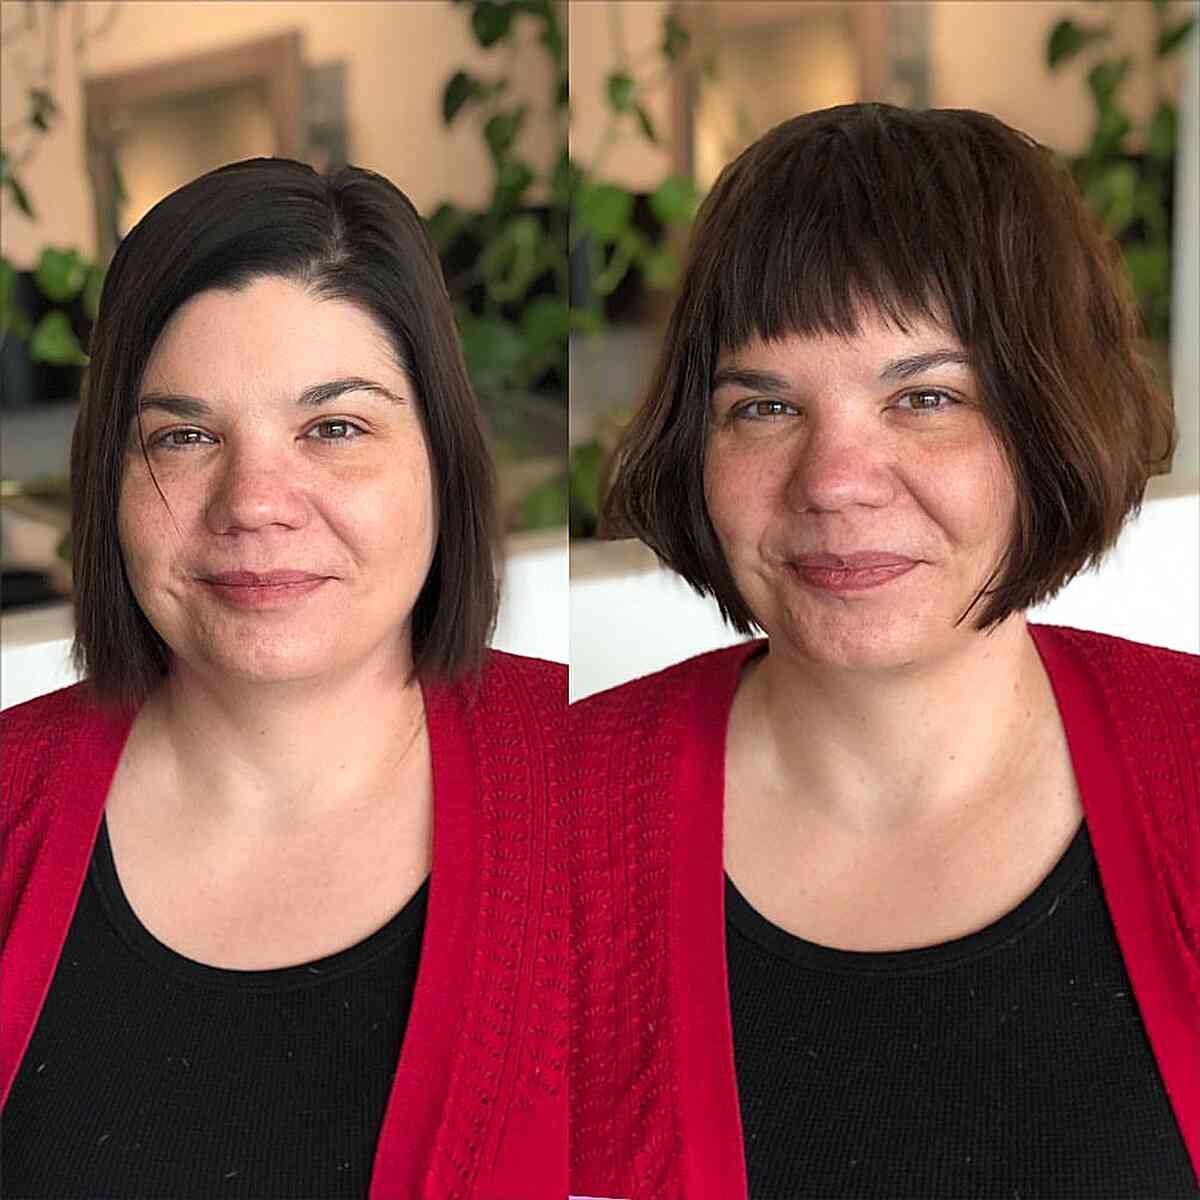 Short Choppy Bangs on a Cute Above-the-Shoulder Bob Cut for round faces